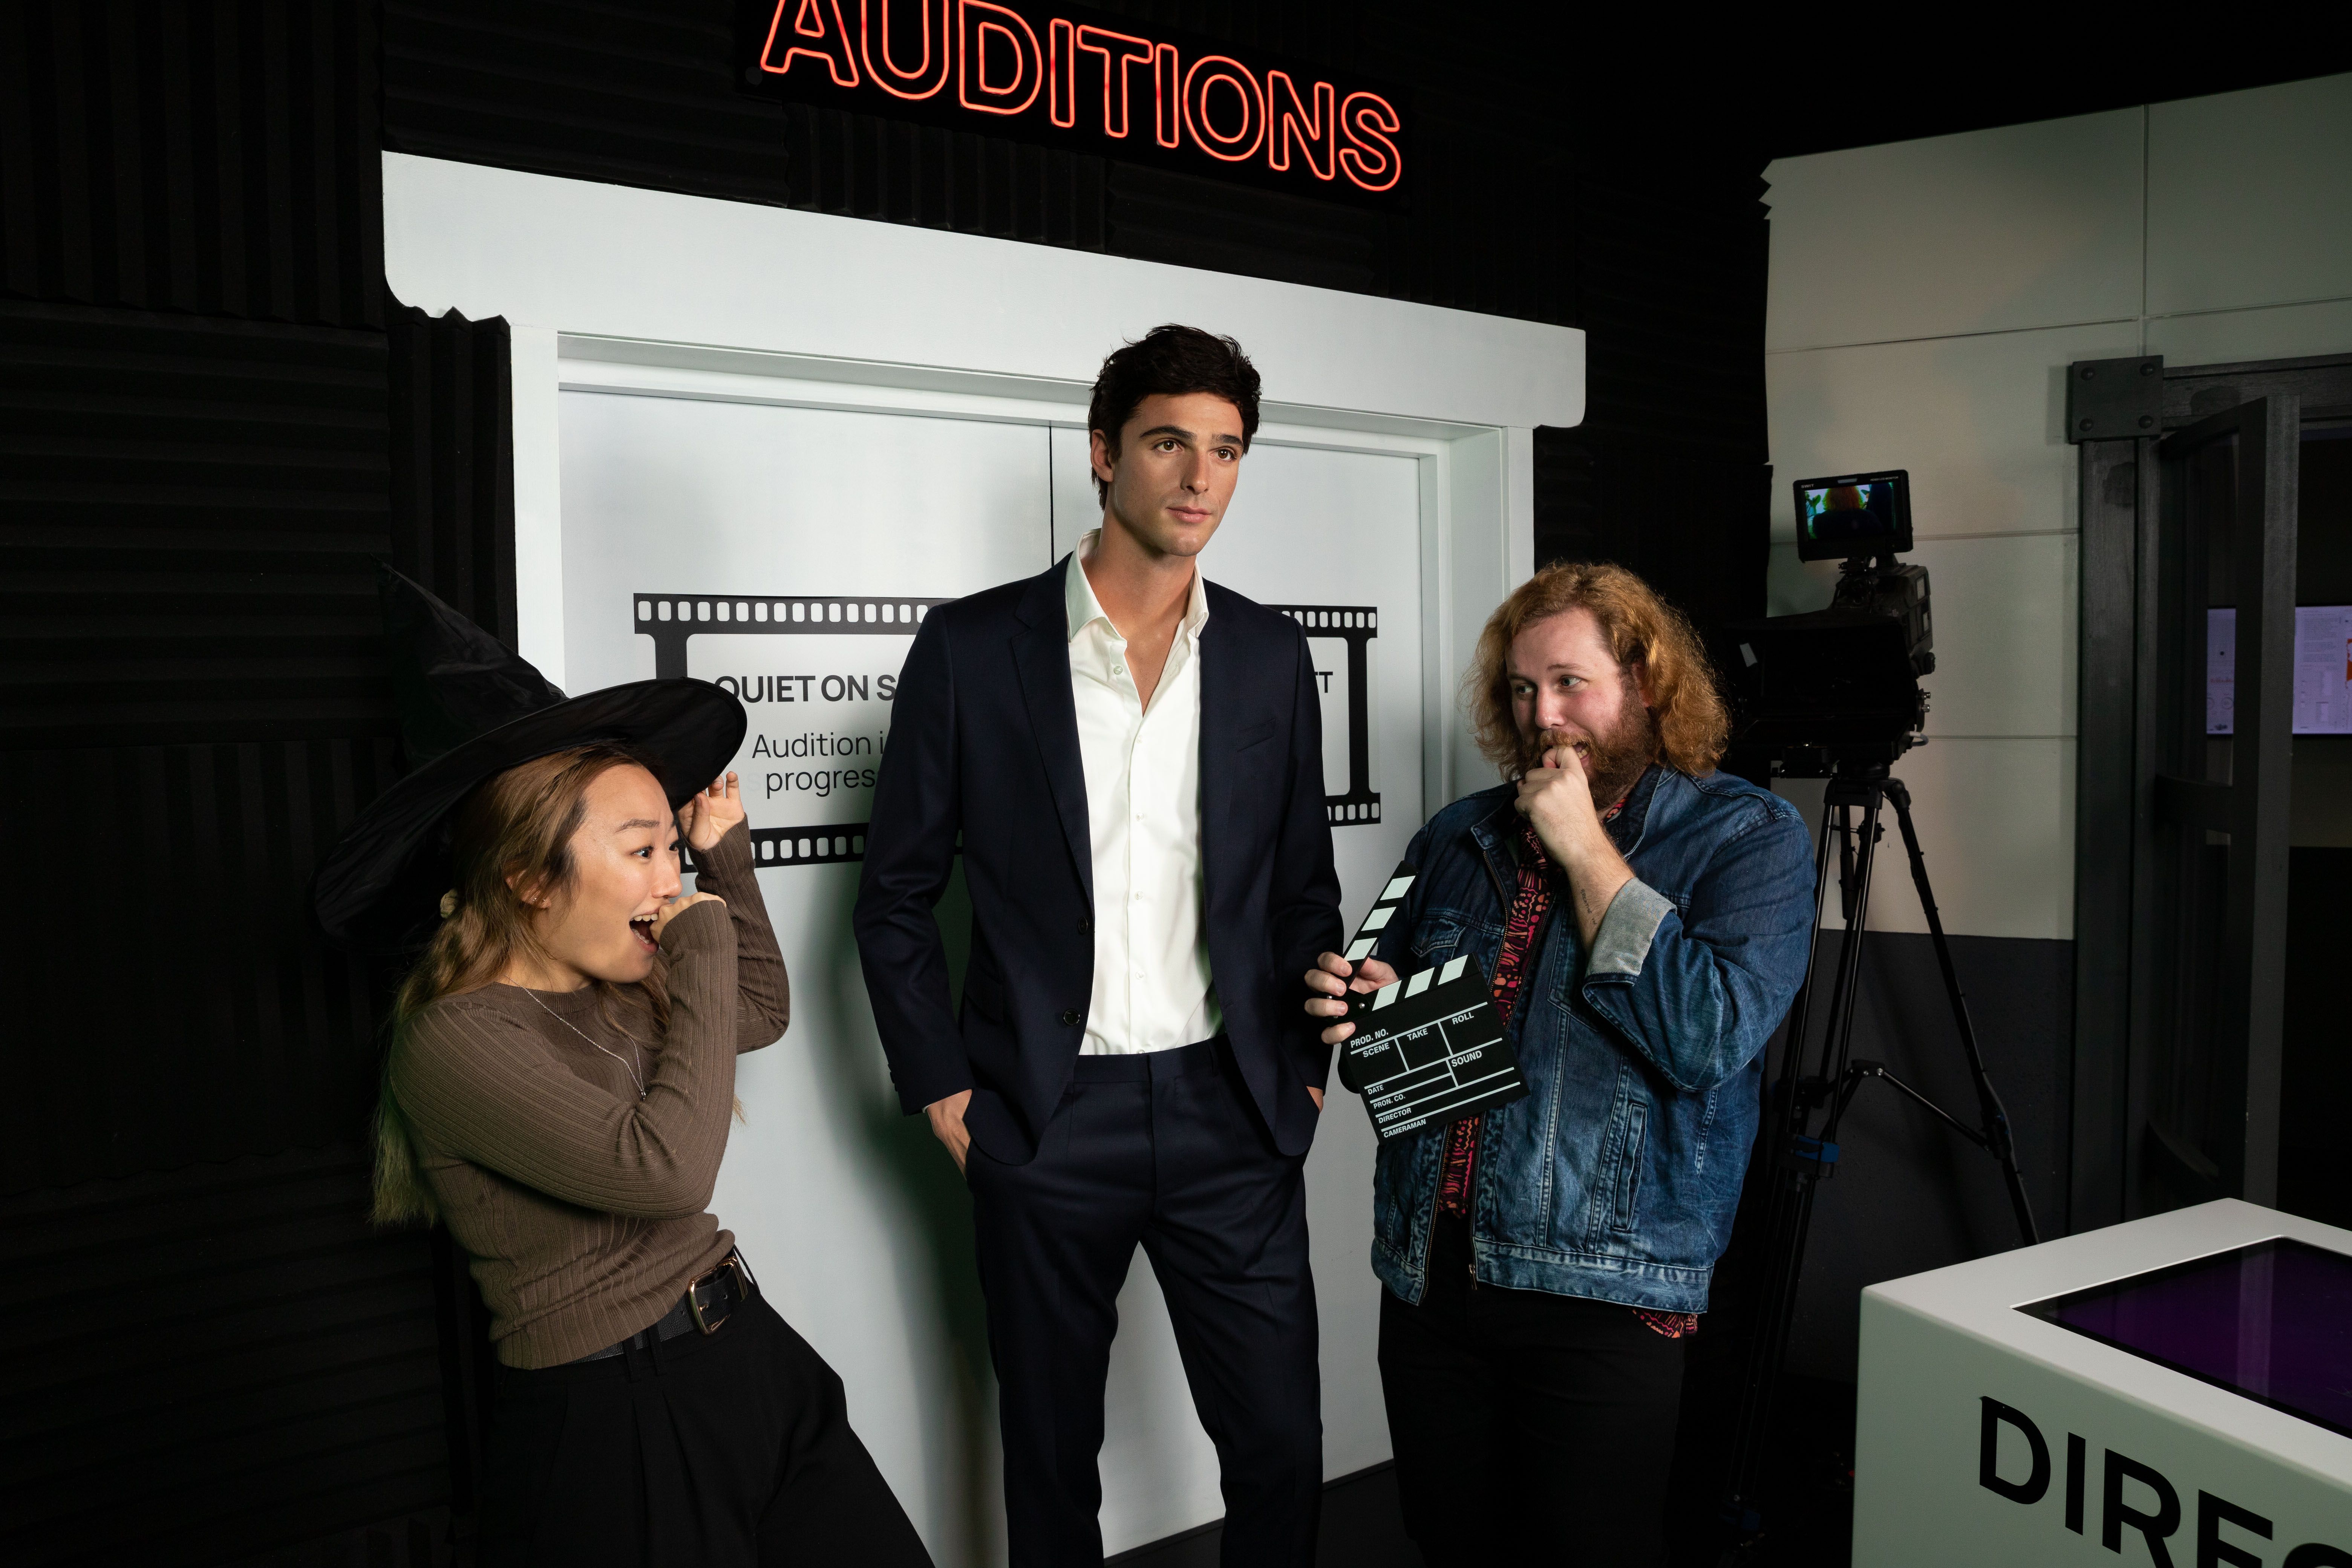 Madame Tussauds Sydney Guests Step On Set With Jacob Elordi